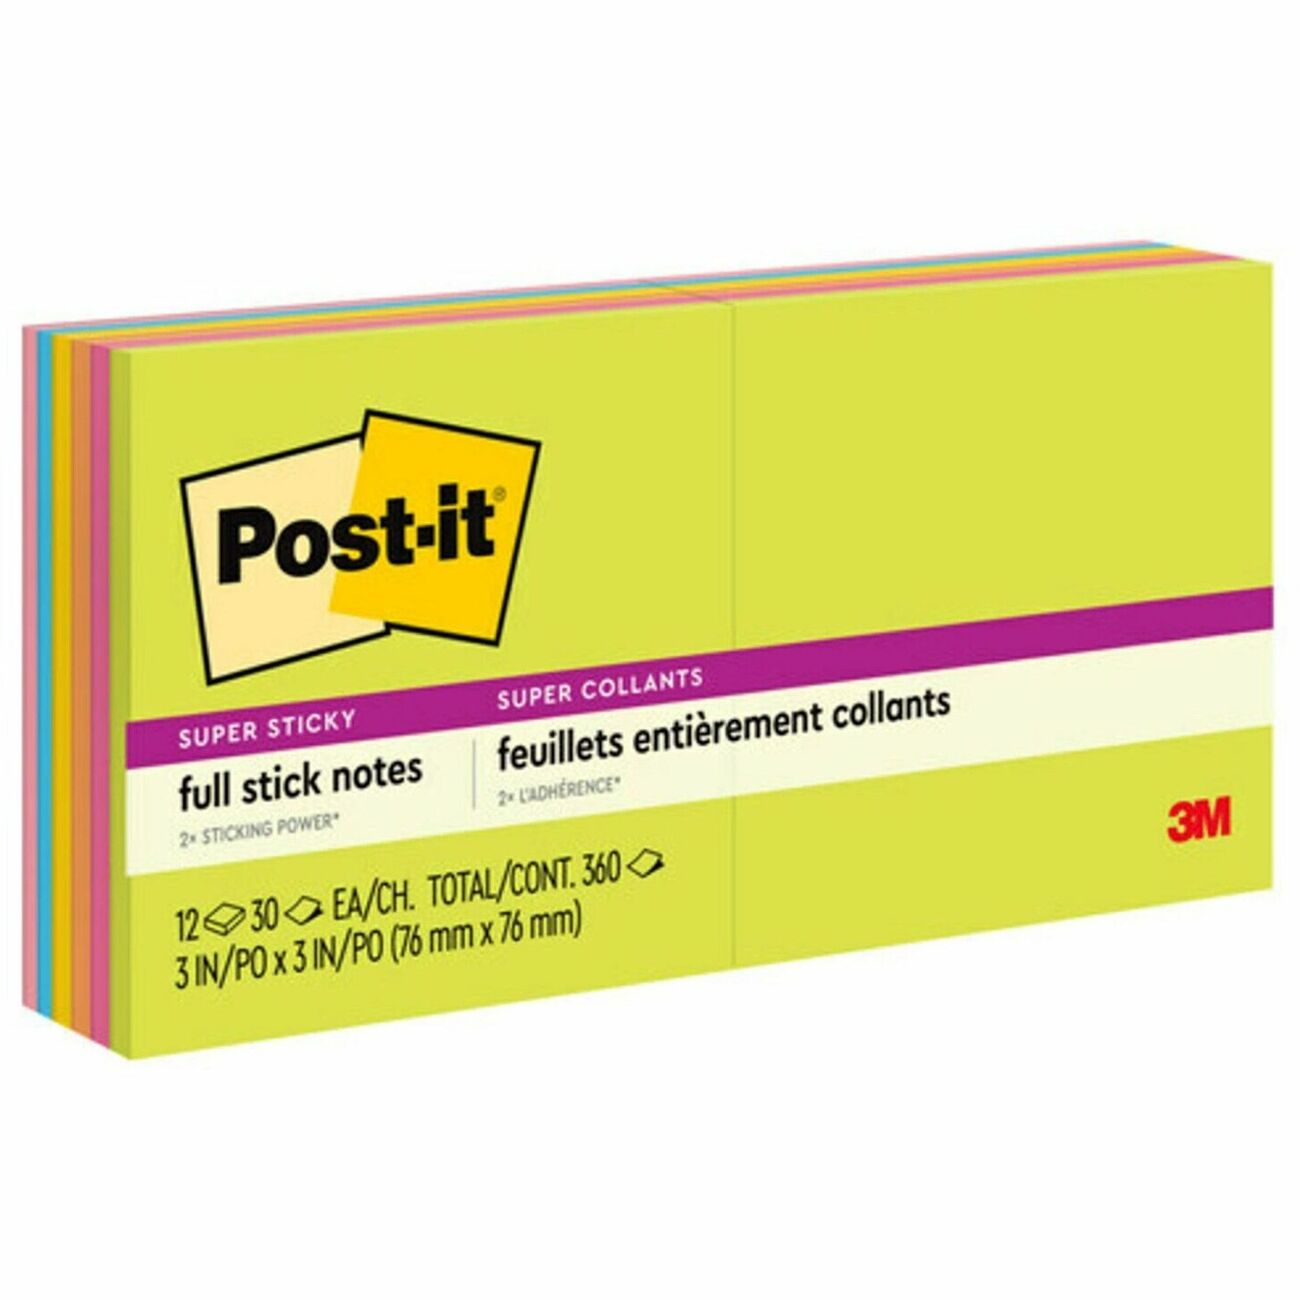 Staples Cardstock Paper 65 lbs 8.5 x 11 Bright Yellow 25 sheets